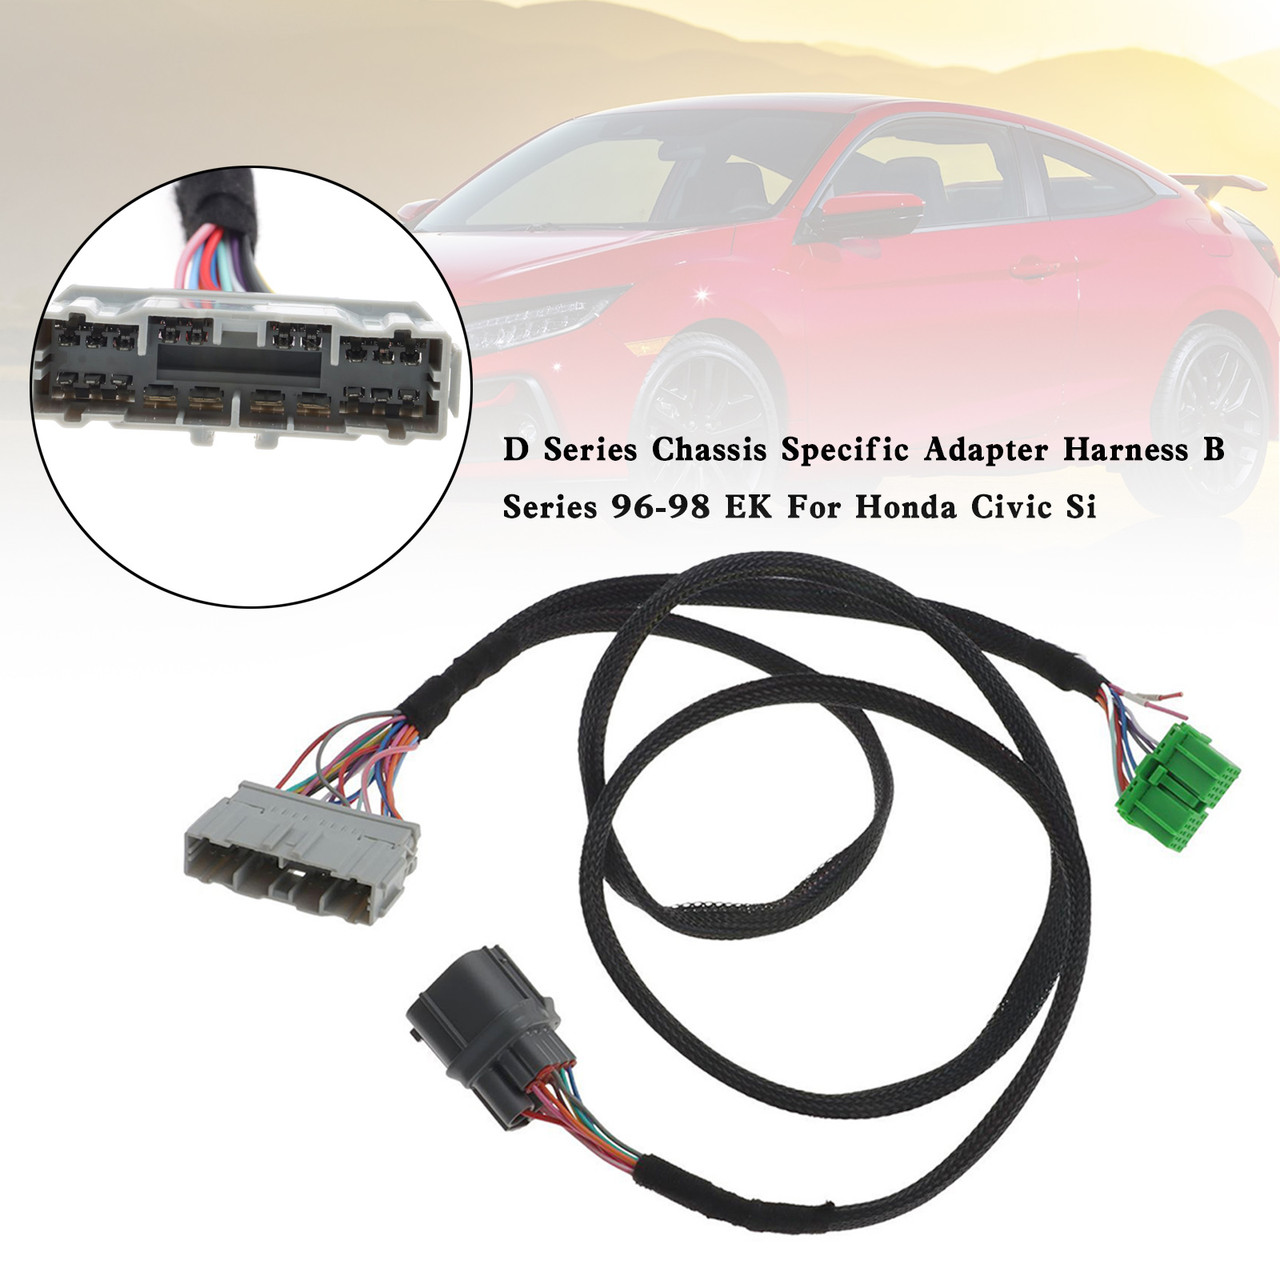 D Series Chassis Specific Adapter Harness B Series 96-98 EK For Honda Civic Si